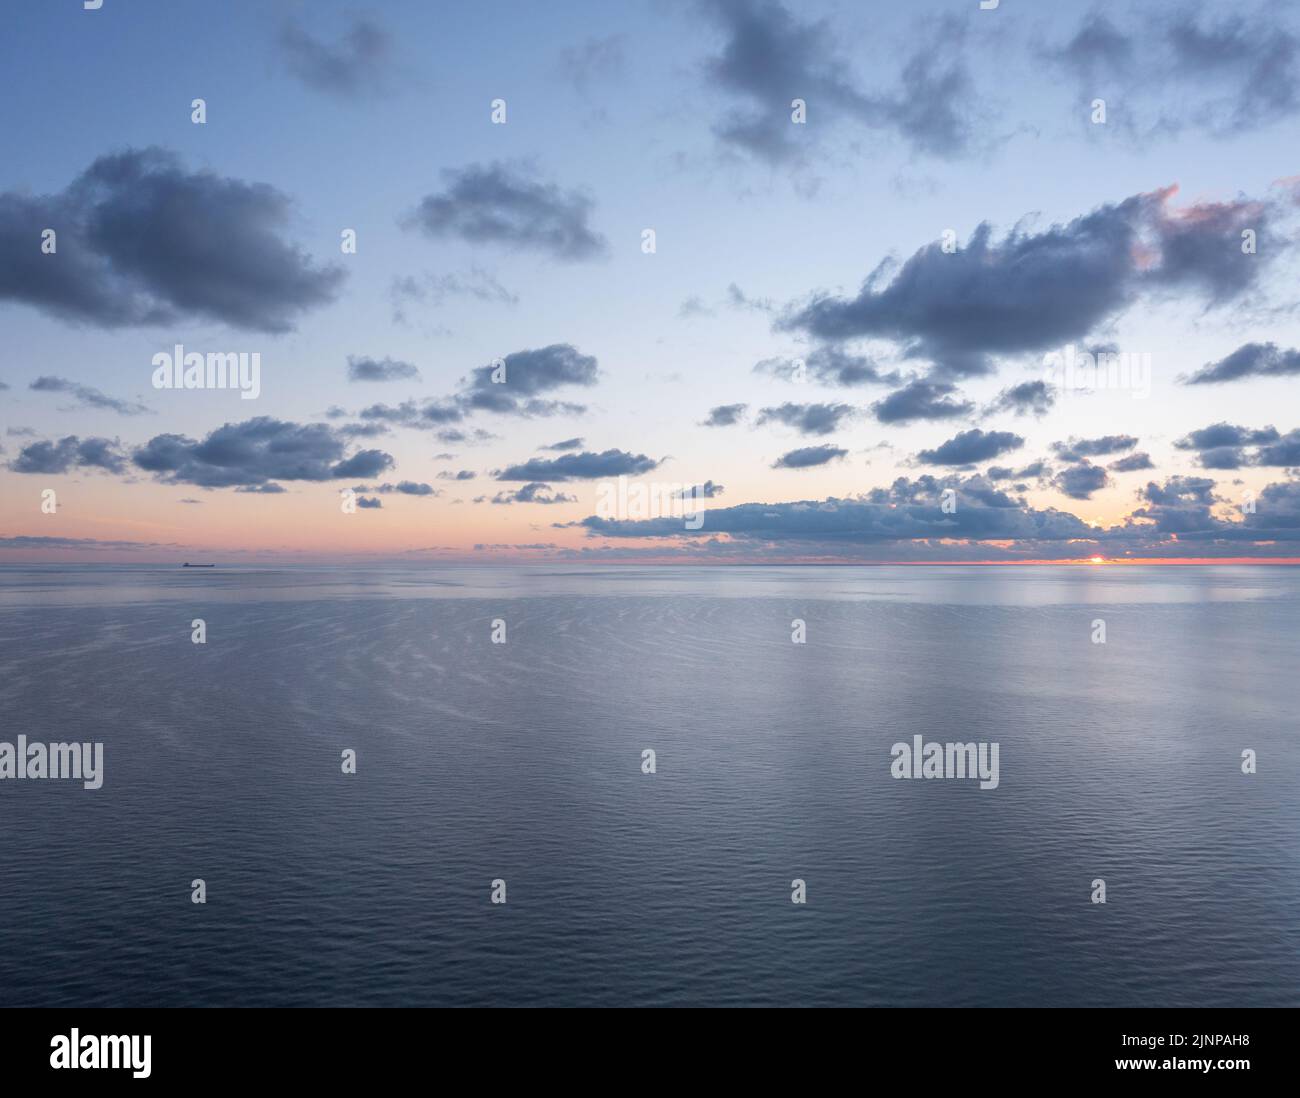 Panoramic view of the calm sunrise over the ocean with copy space Stock Photo